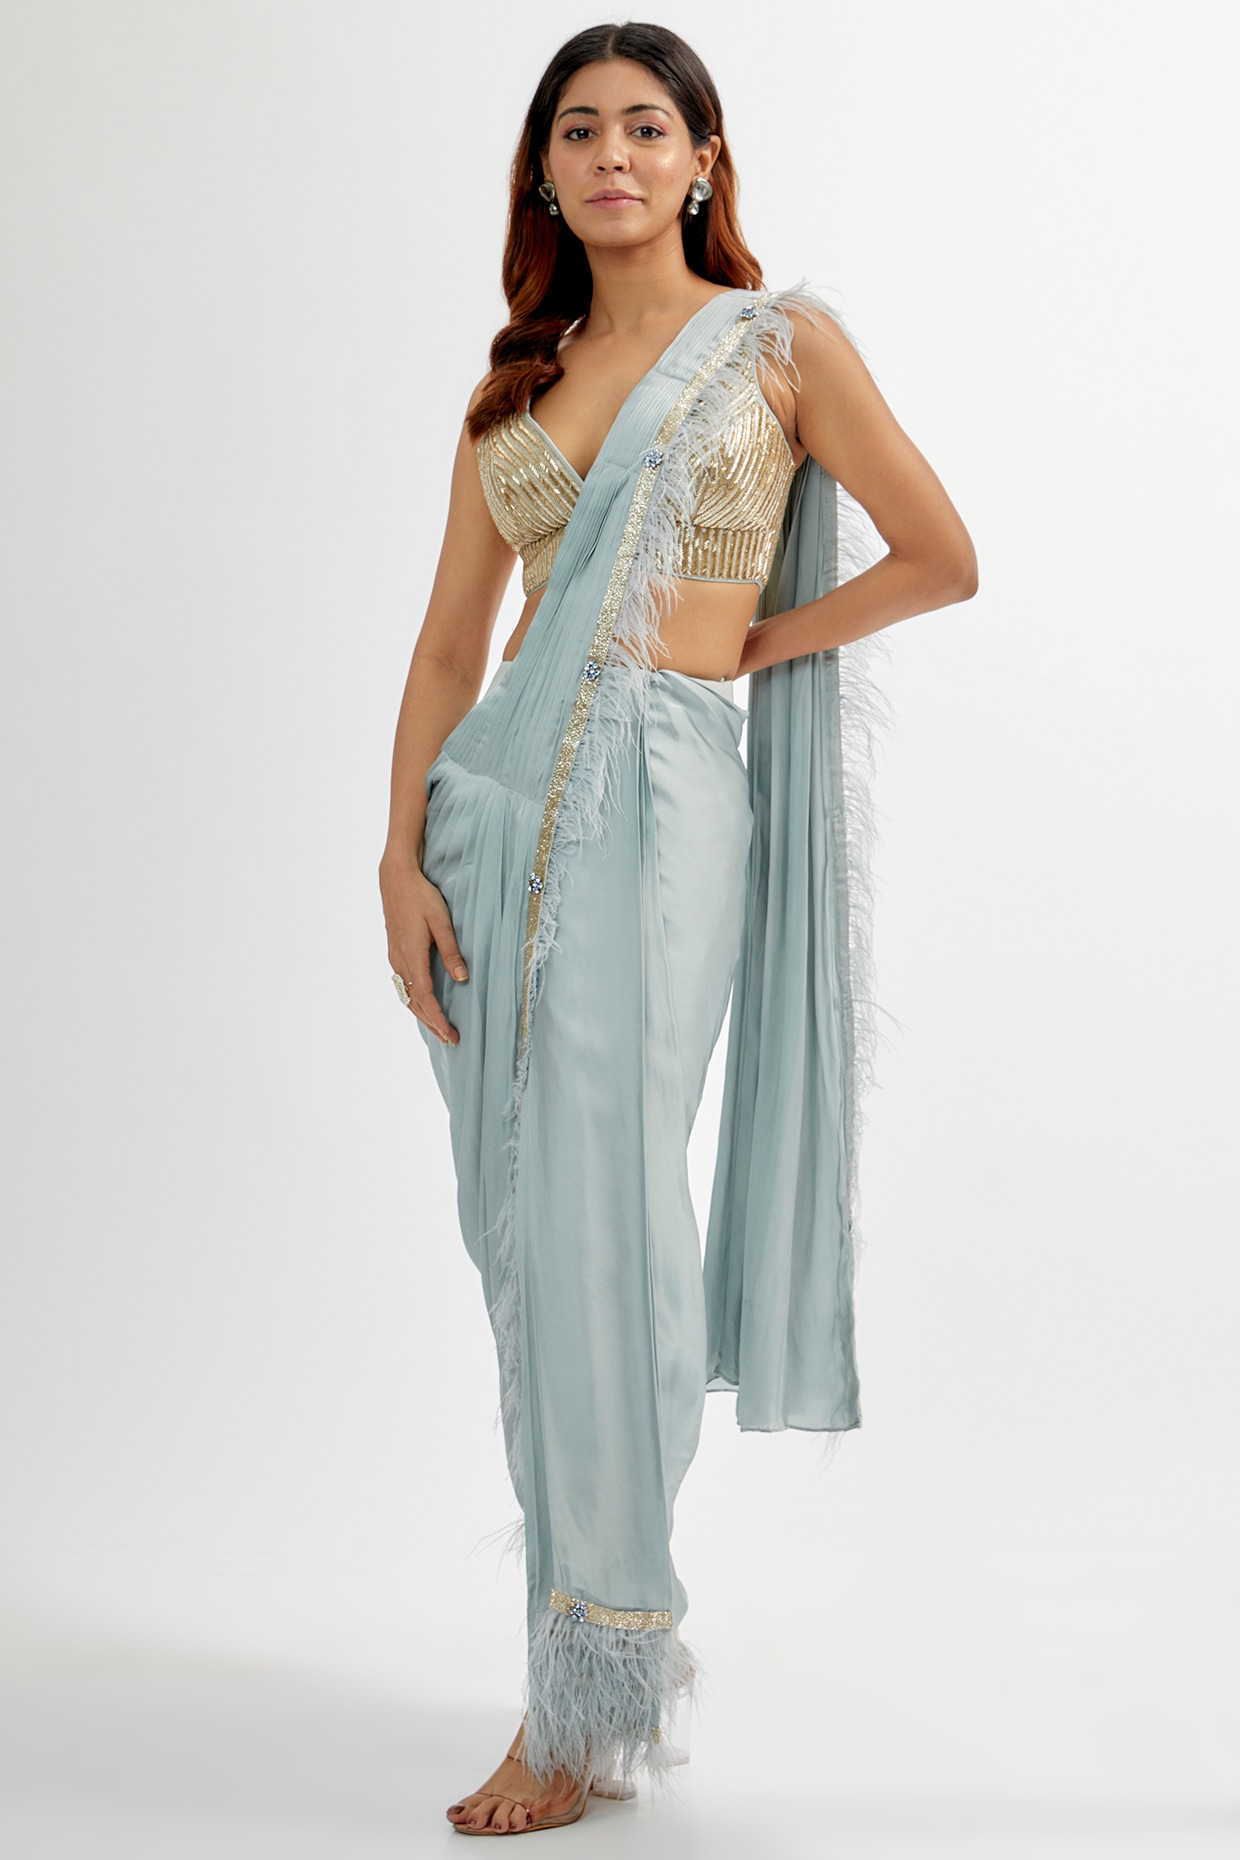 New Arrivals | $39 - $52 - Morpeach Pant Style/1000 Saree and Morpeach Pant  Style/1000 Sari Online Shopping